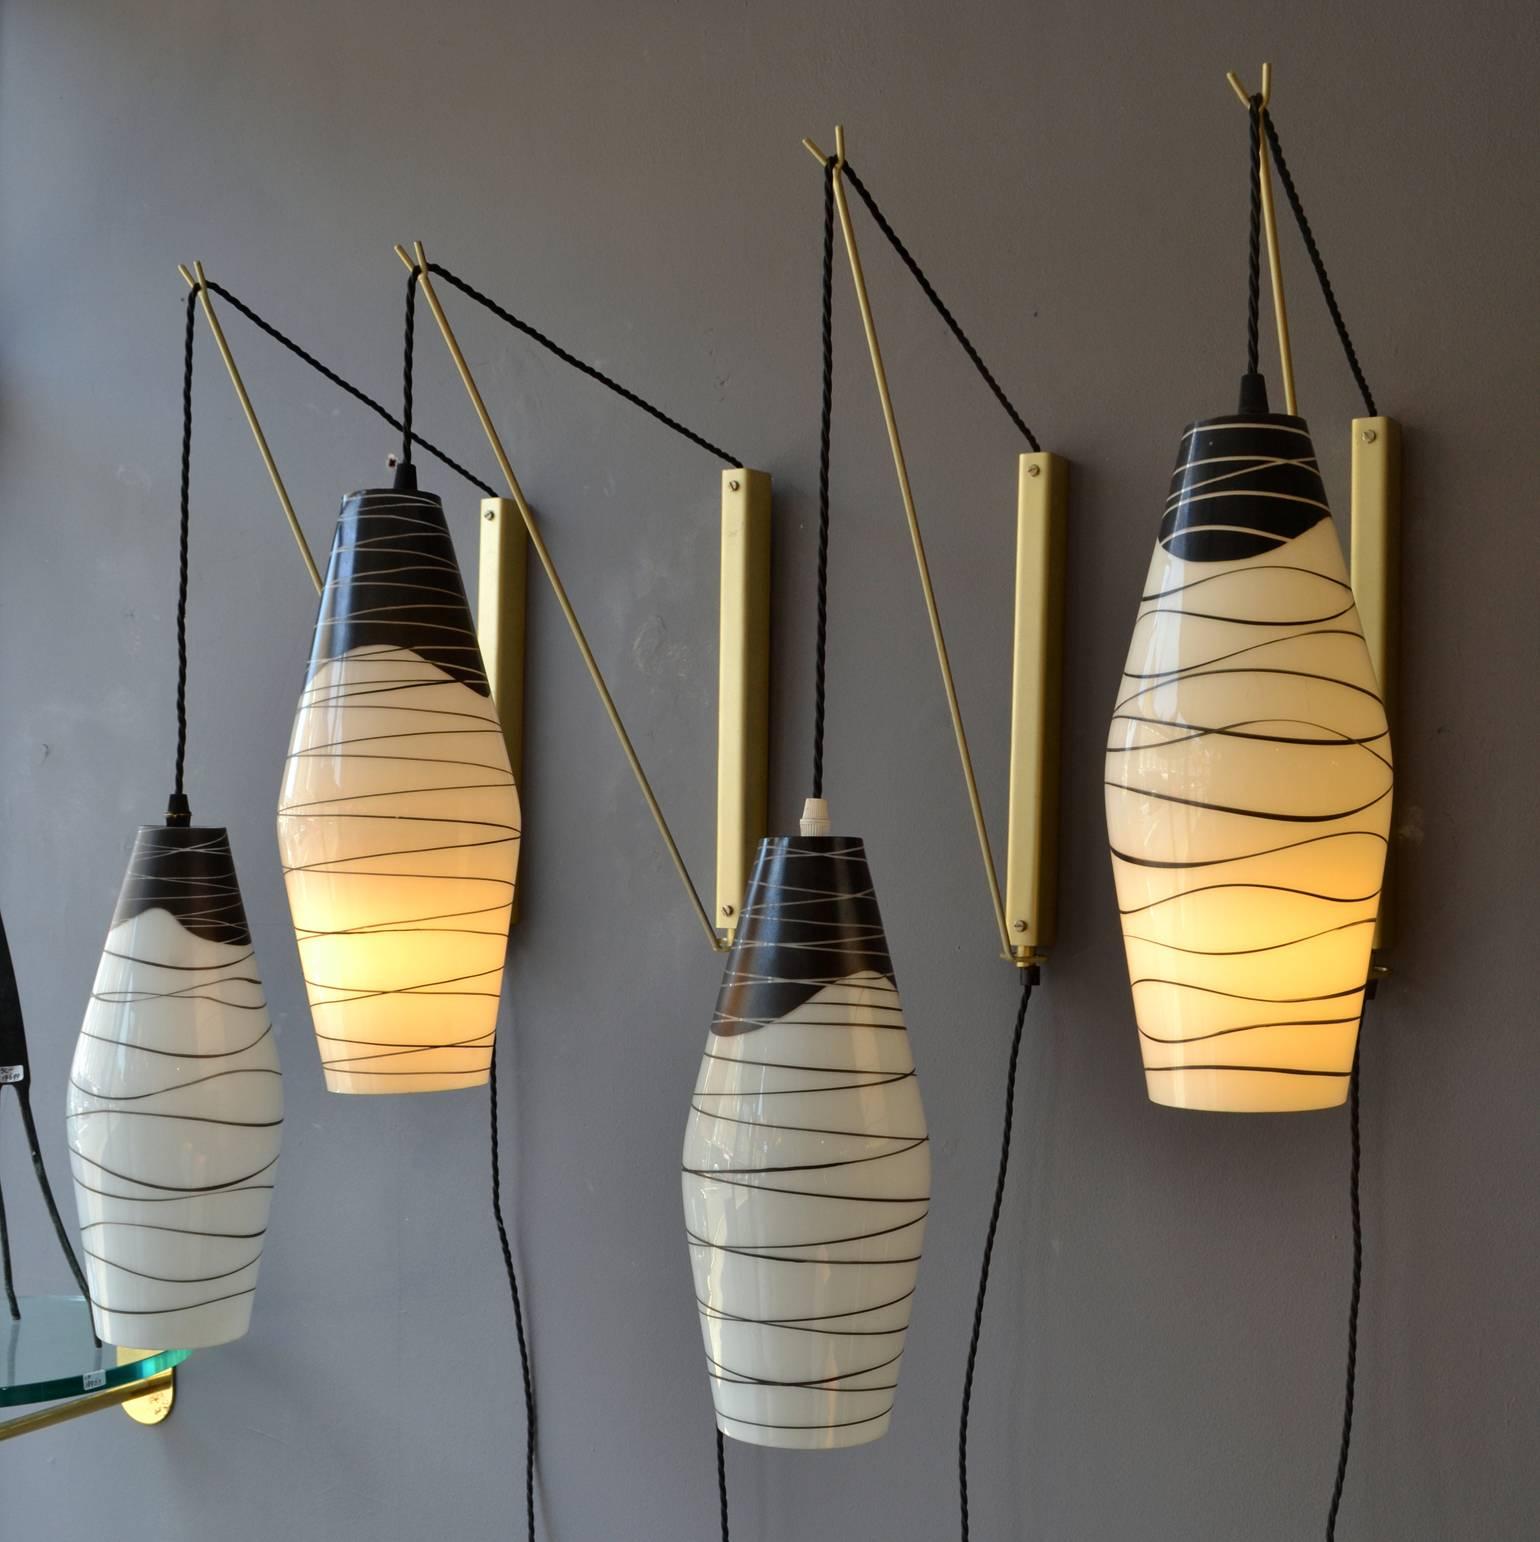 Two pairs of wall-mounted pendants with opaline shades hand-painted in black hanging of black braided flex on an adjustable bronzed metal bracket. The height of the flex can be adjusted and the metal bracket allows the lamps to hang closer or